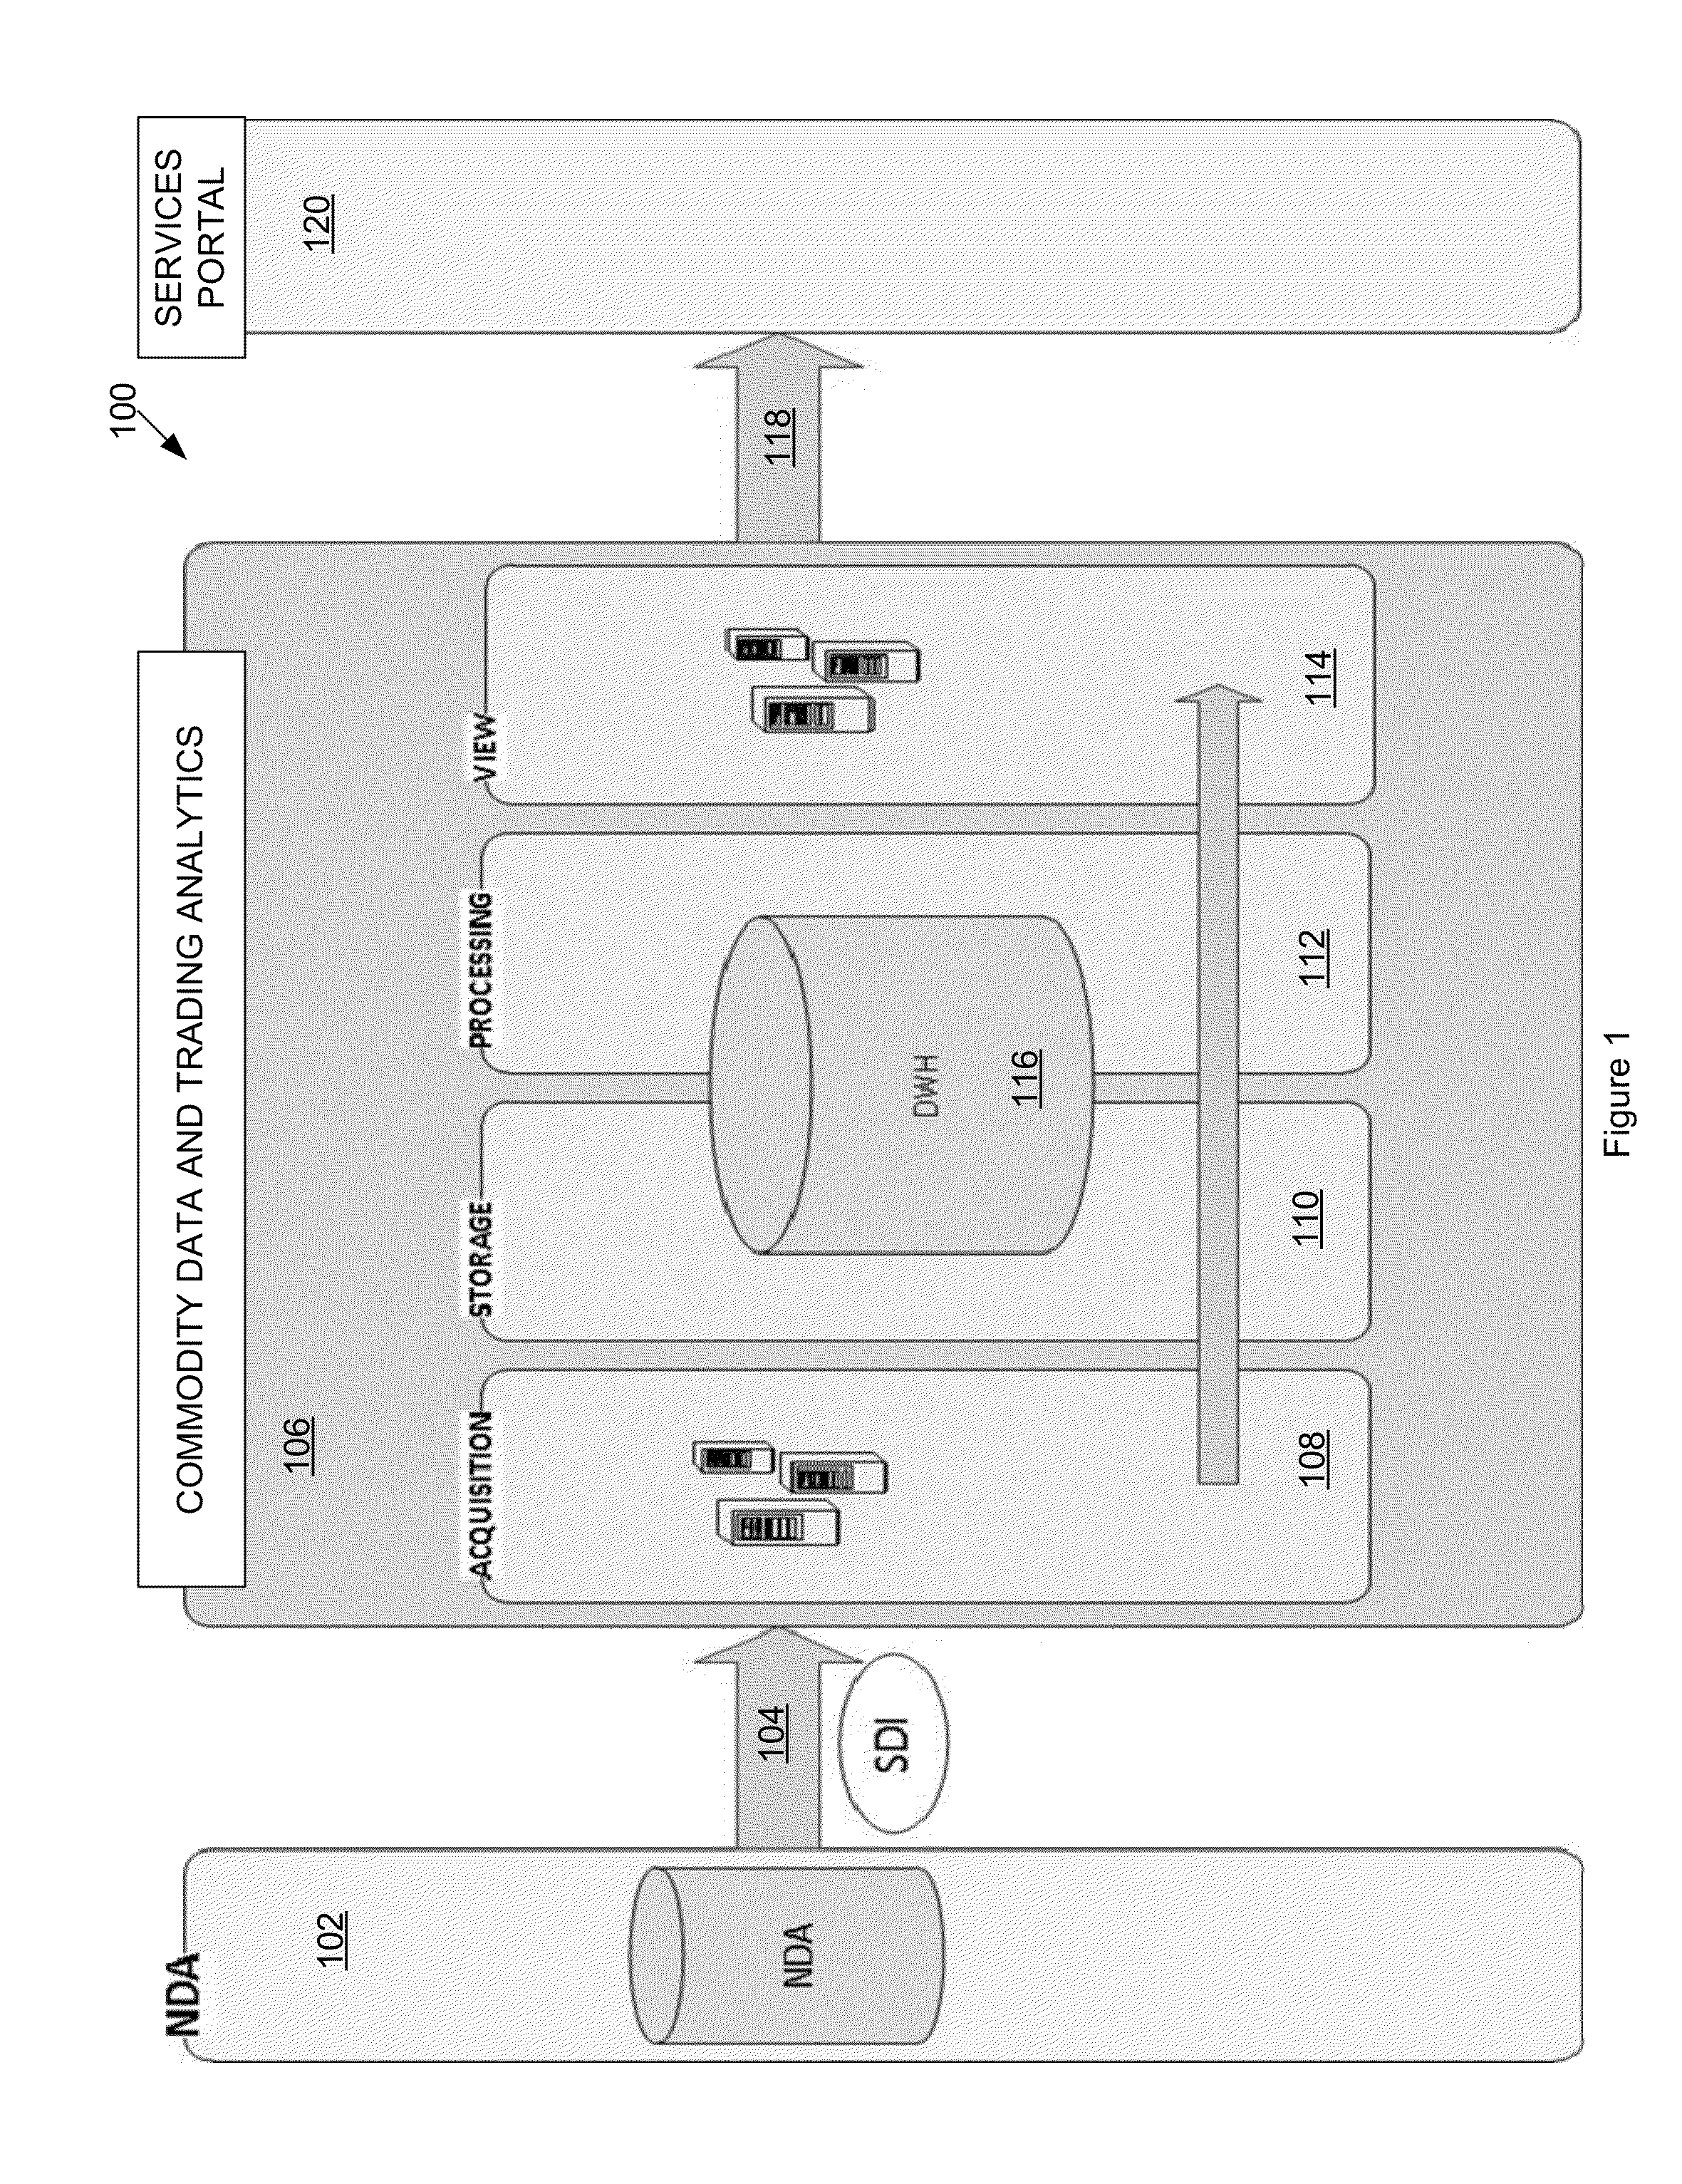 Methods and systems for managing supply chain processes and intelligence